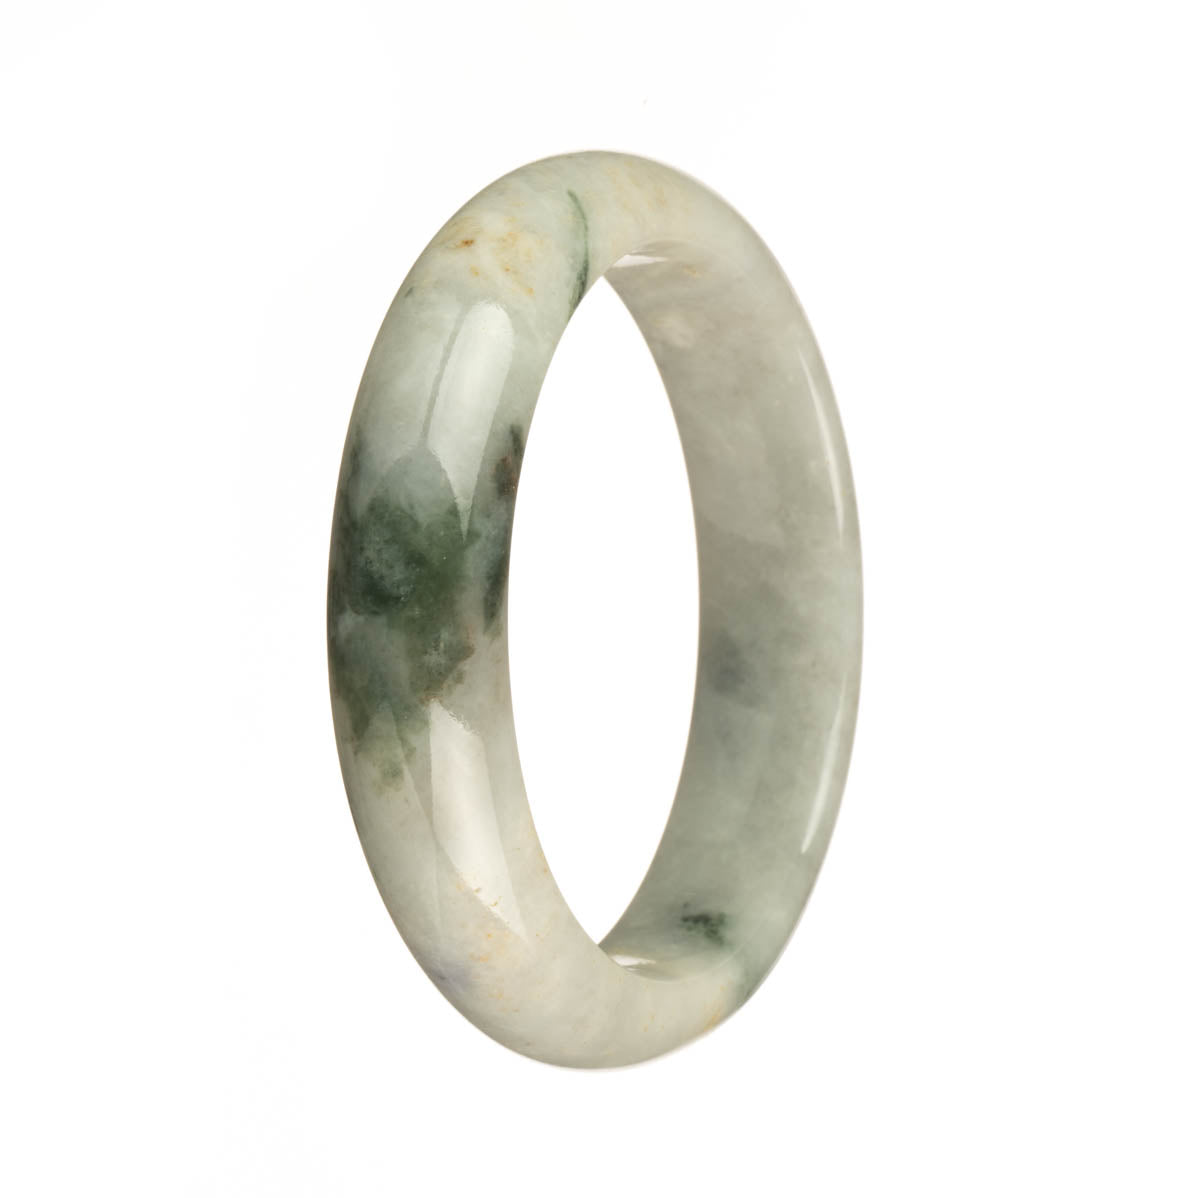 Close-up of a traditional jade bracelet with a half moon shape. It features a white base color with dark green patterns and red spots, symbolizing authenticity.